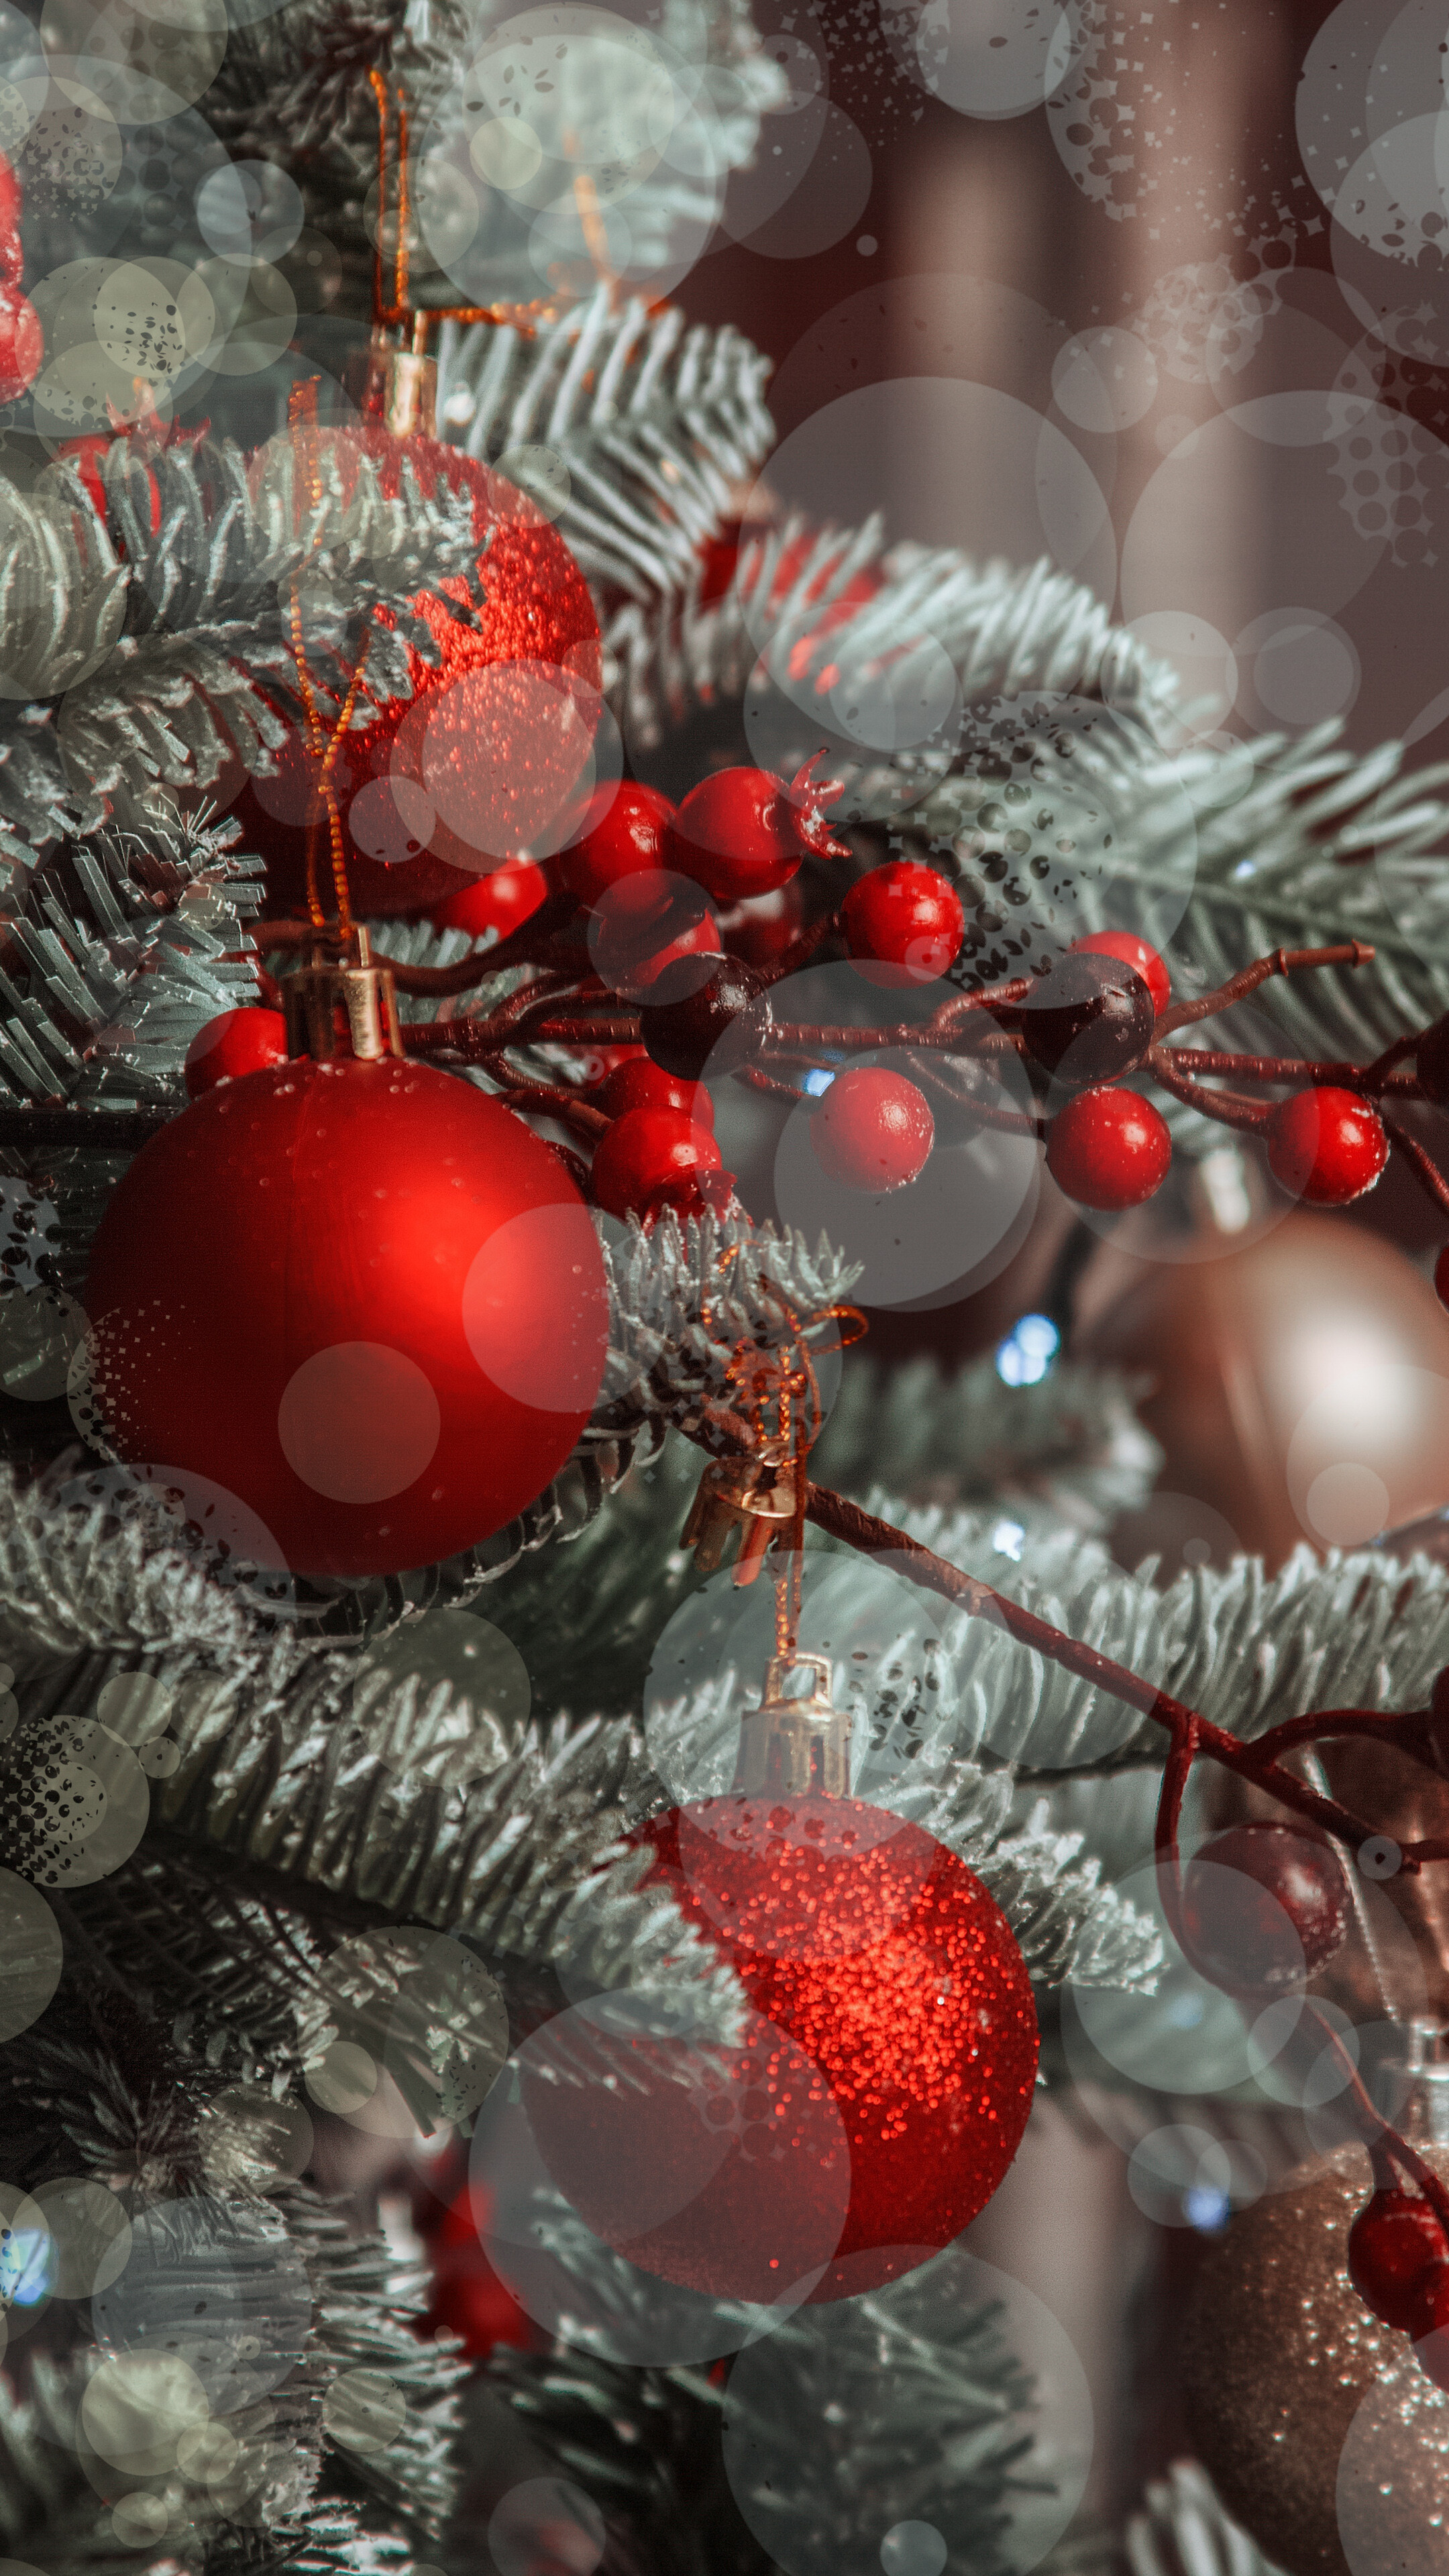 Christmas Ornament: Decorated with colored baubles, Festive season. 2160x3840 4K Background.